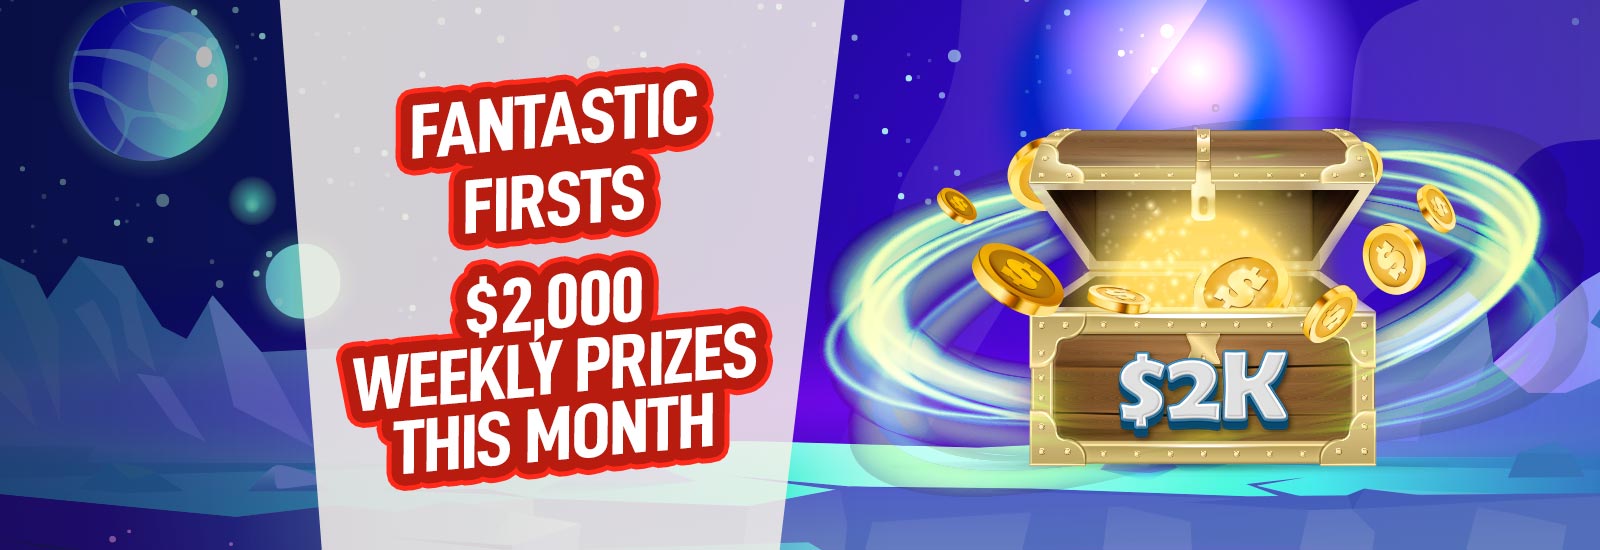 FANTASTIC FIRSTS $2,000 weekly prizes this month